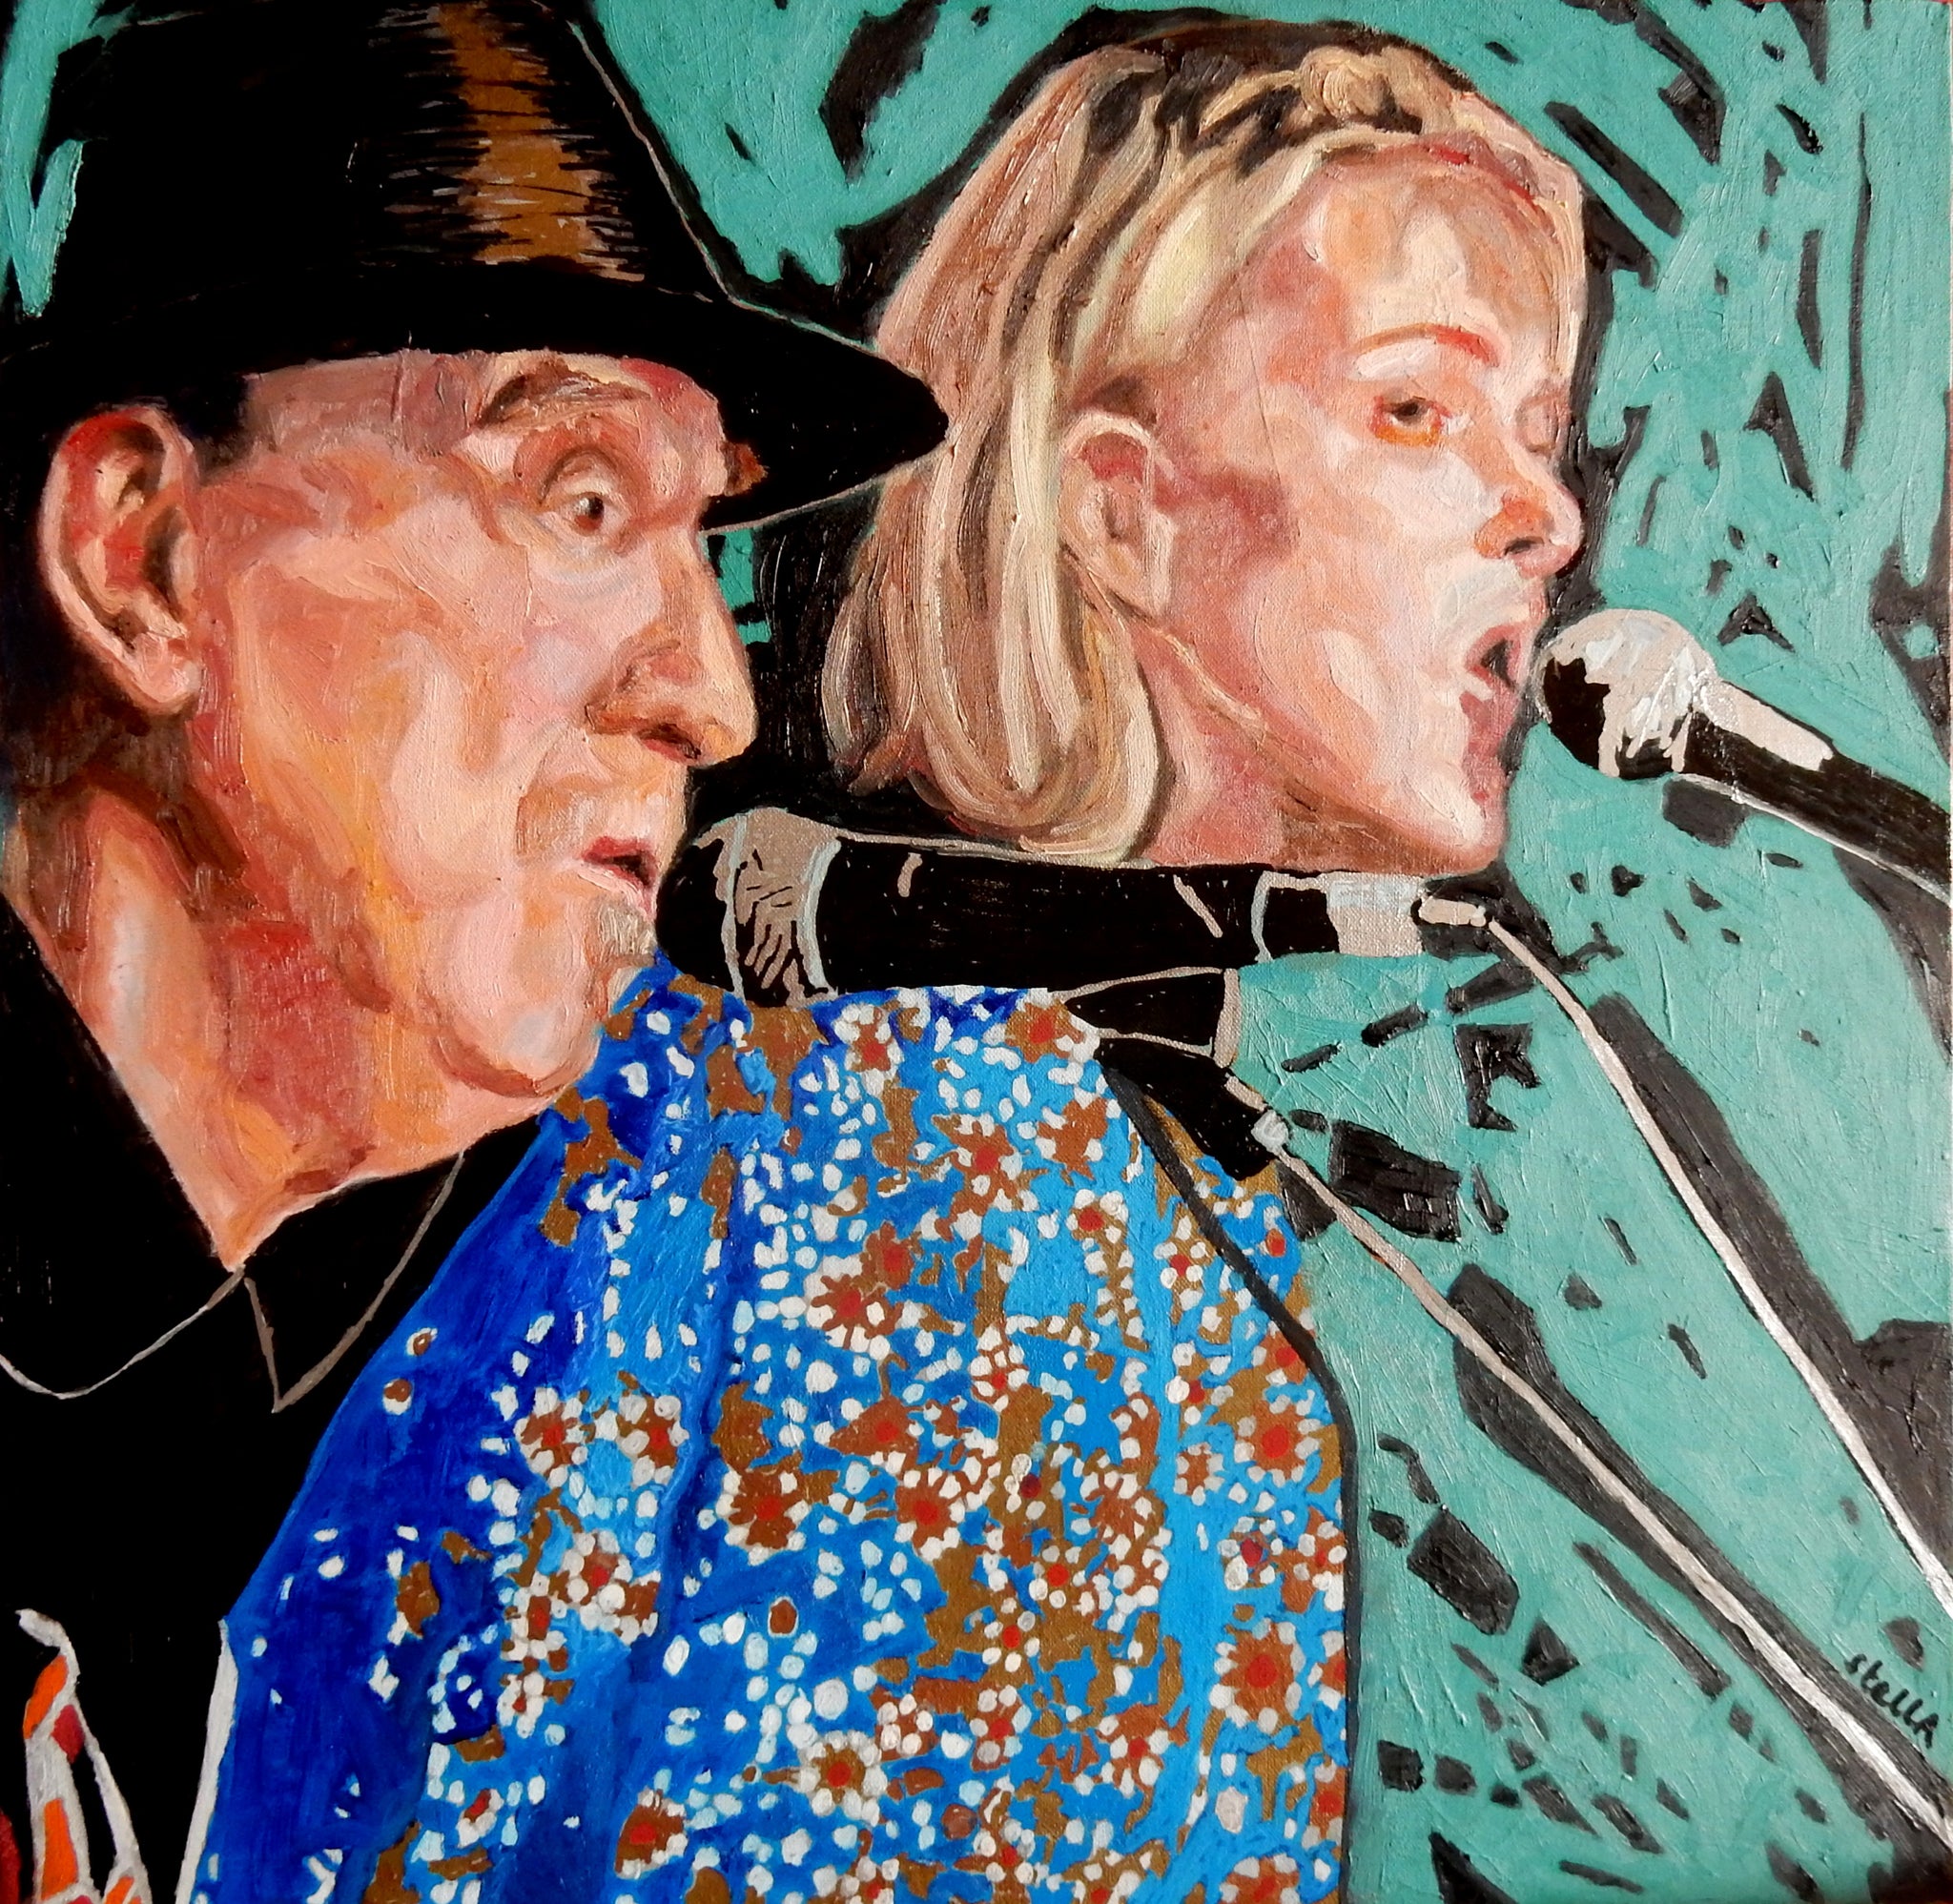 Hank Wangford and Spanner at the Half Moon Putney oil on canvas by Stella Tooth artist